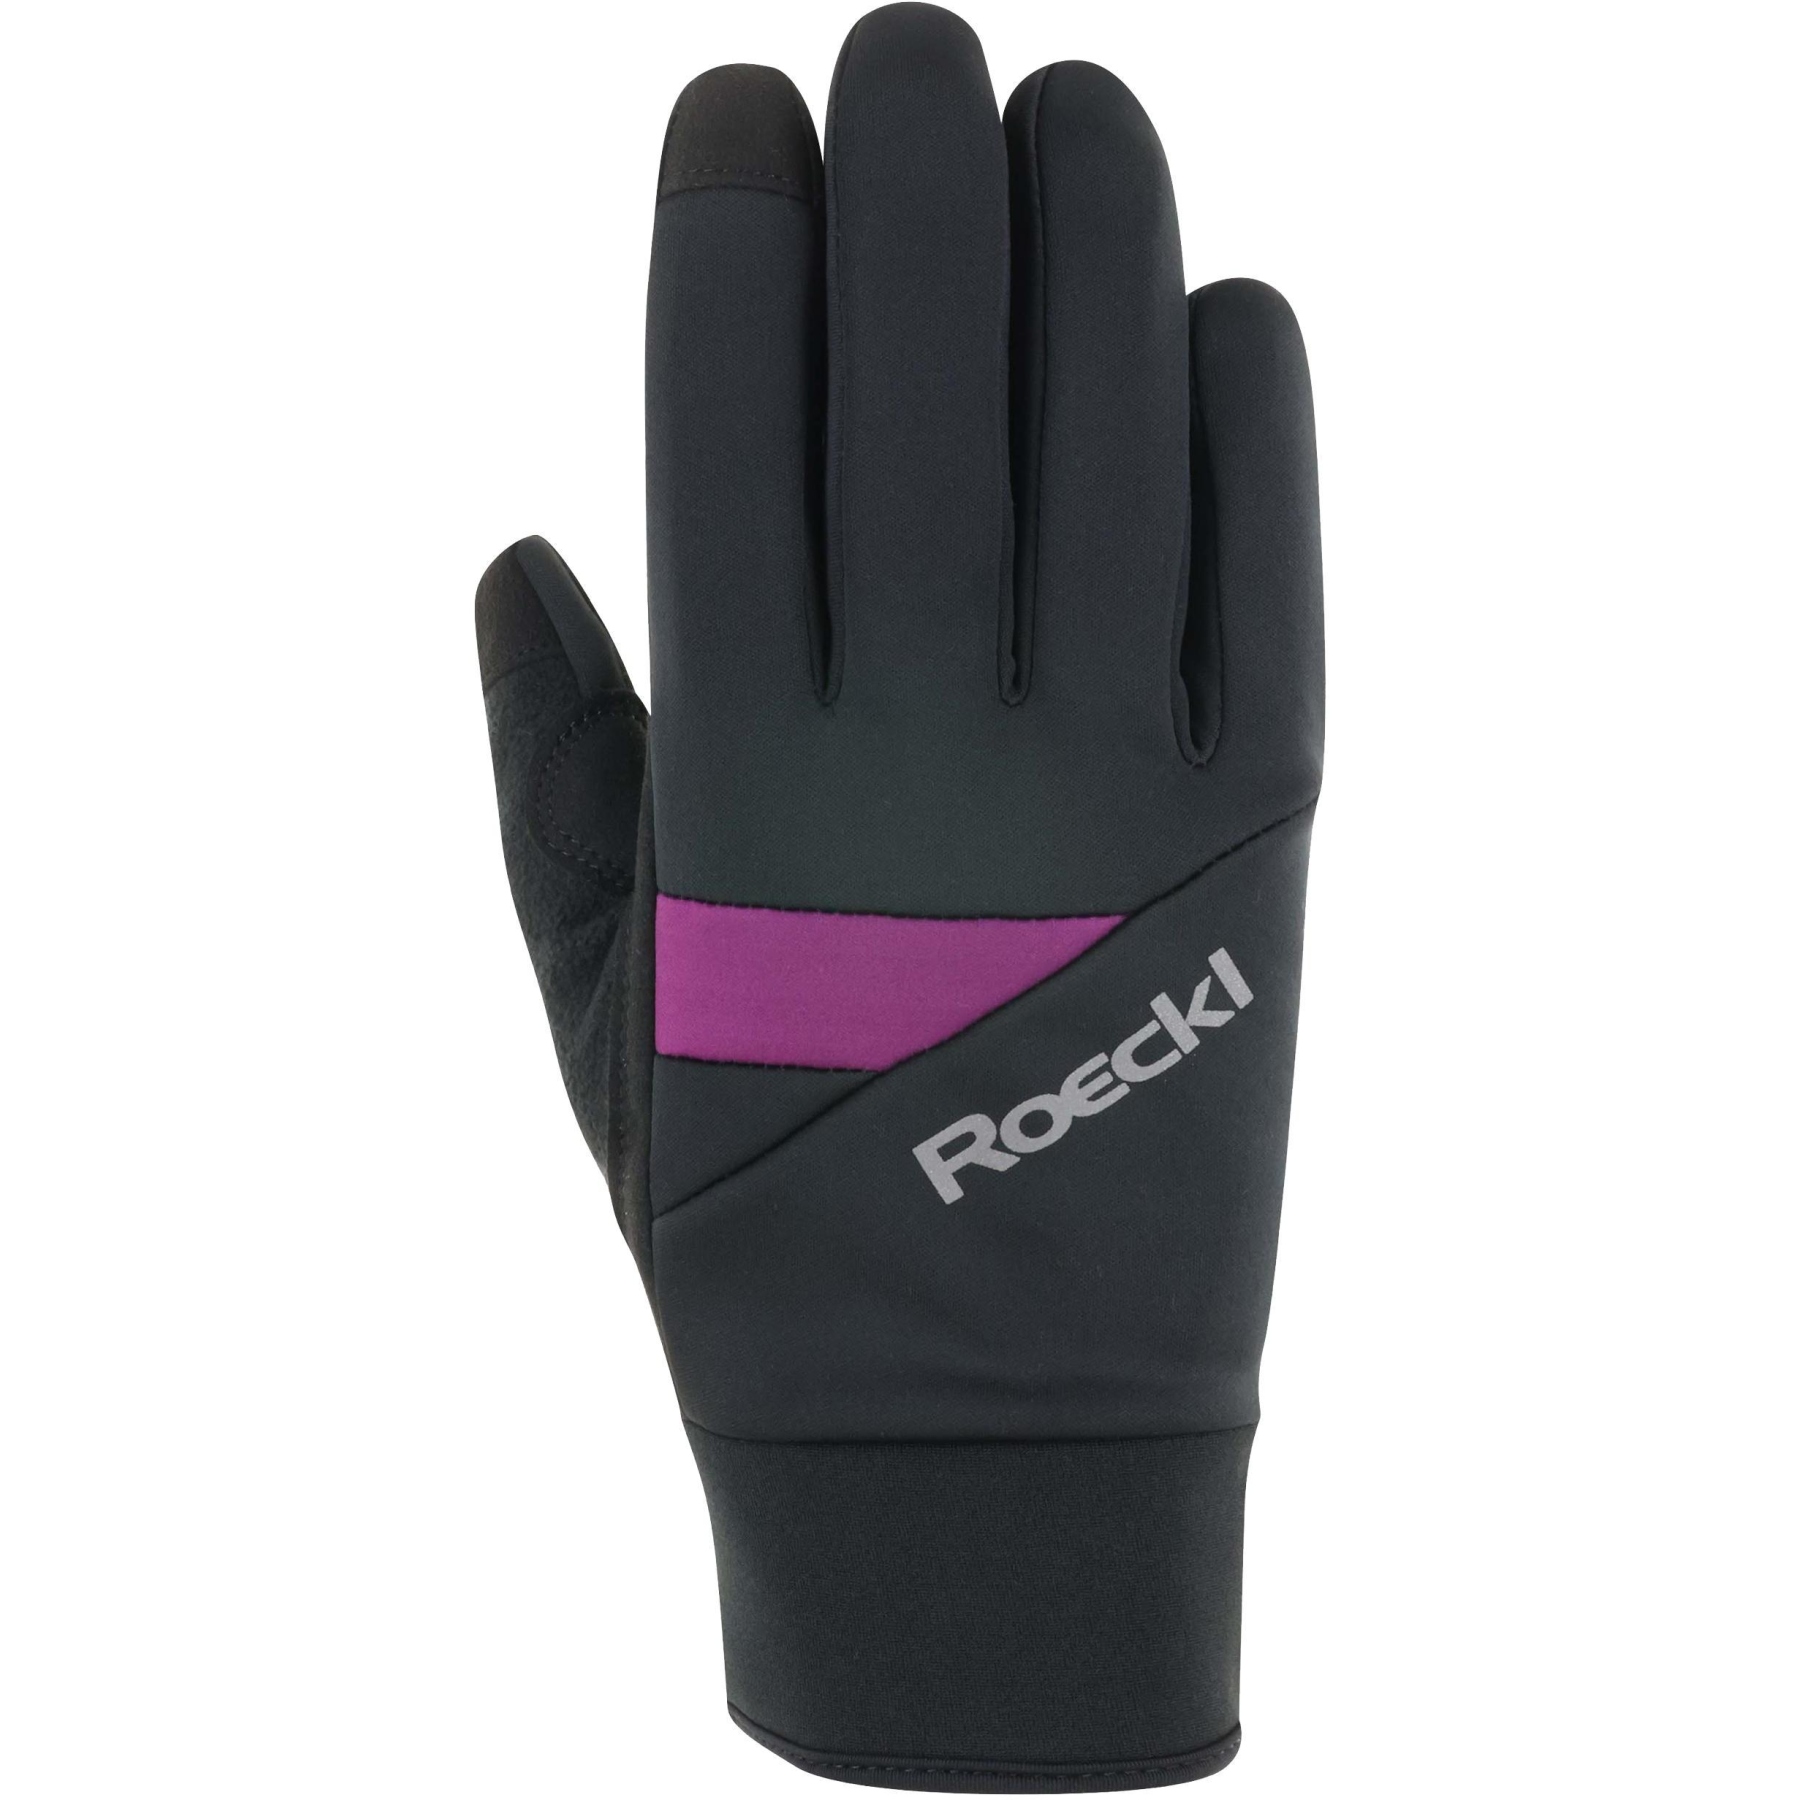 Picture of Roeckl Sports Reichenthal Juniors Cycling Gloves - black/purple 9461